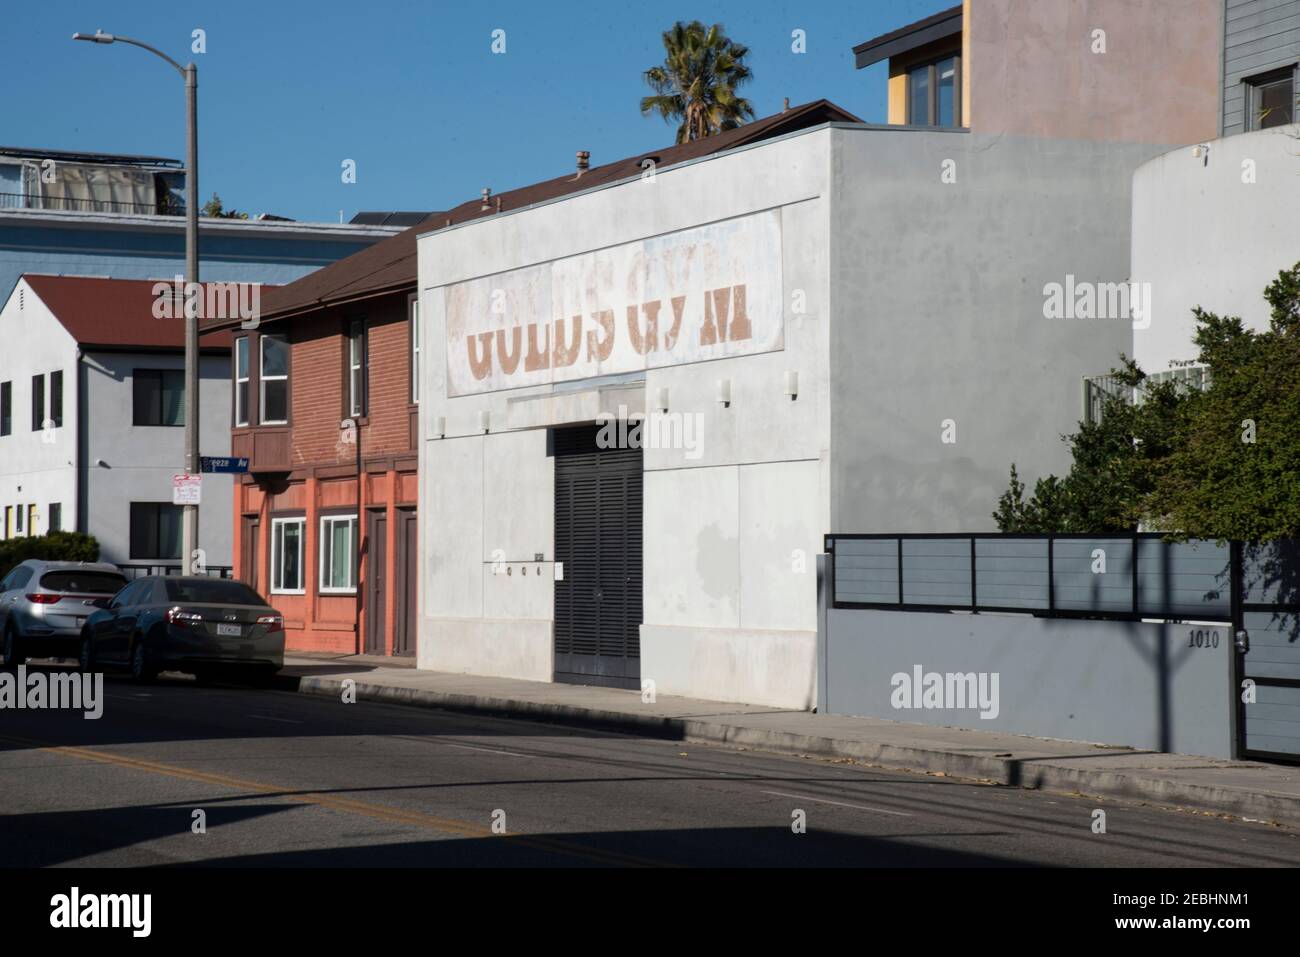 Venice, CA USA - Jan 19, 2021: The original Gold’s Gym where the movie Pumping Iron was filmed and the fitness craze began Stock Photo